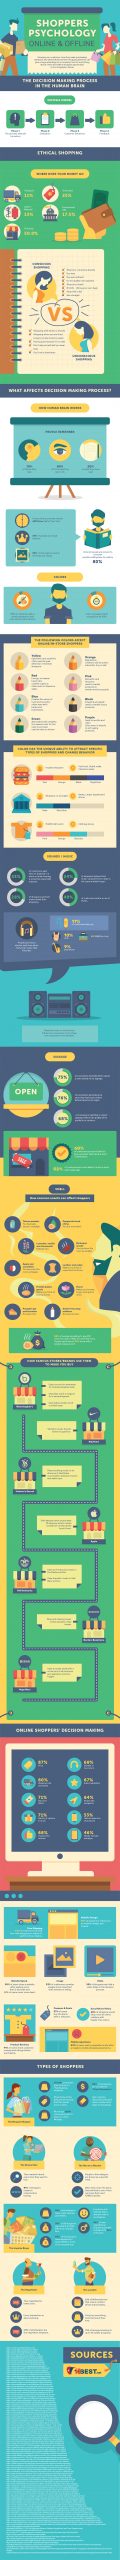 , Shopper Psychology: How to Use Basic Psychology to Increase Online and Offline Sales [Infographic], TornCRM